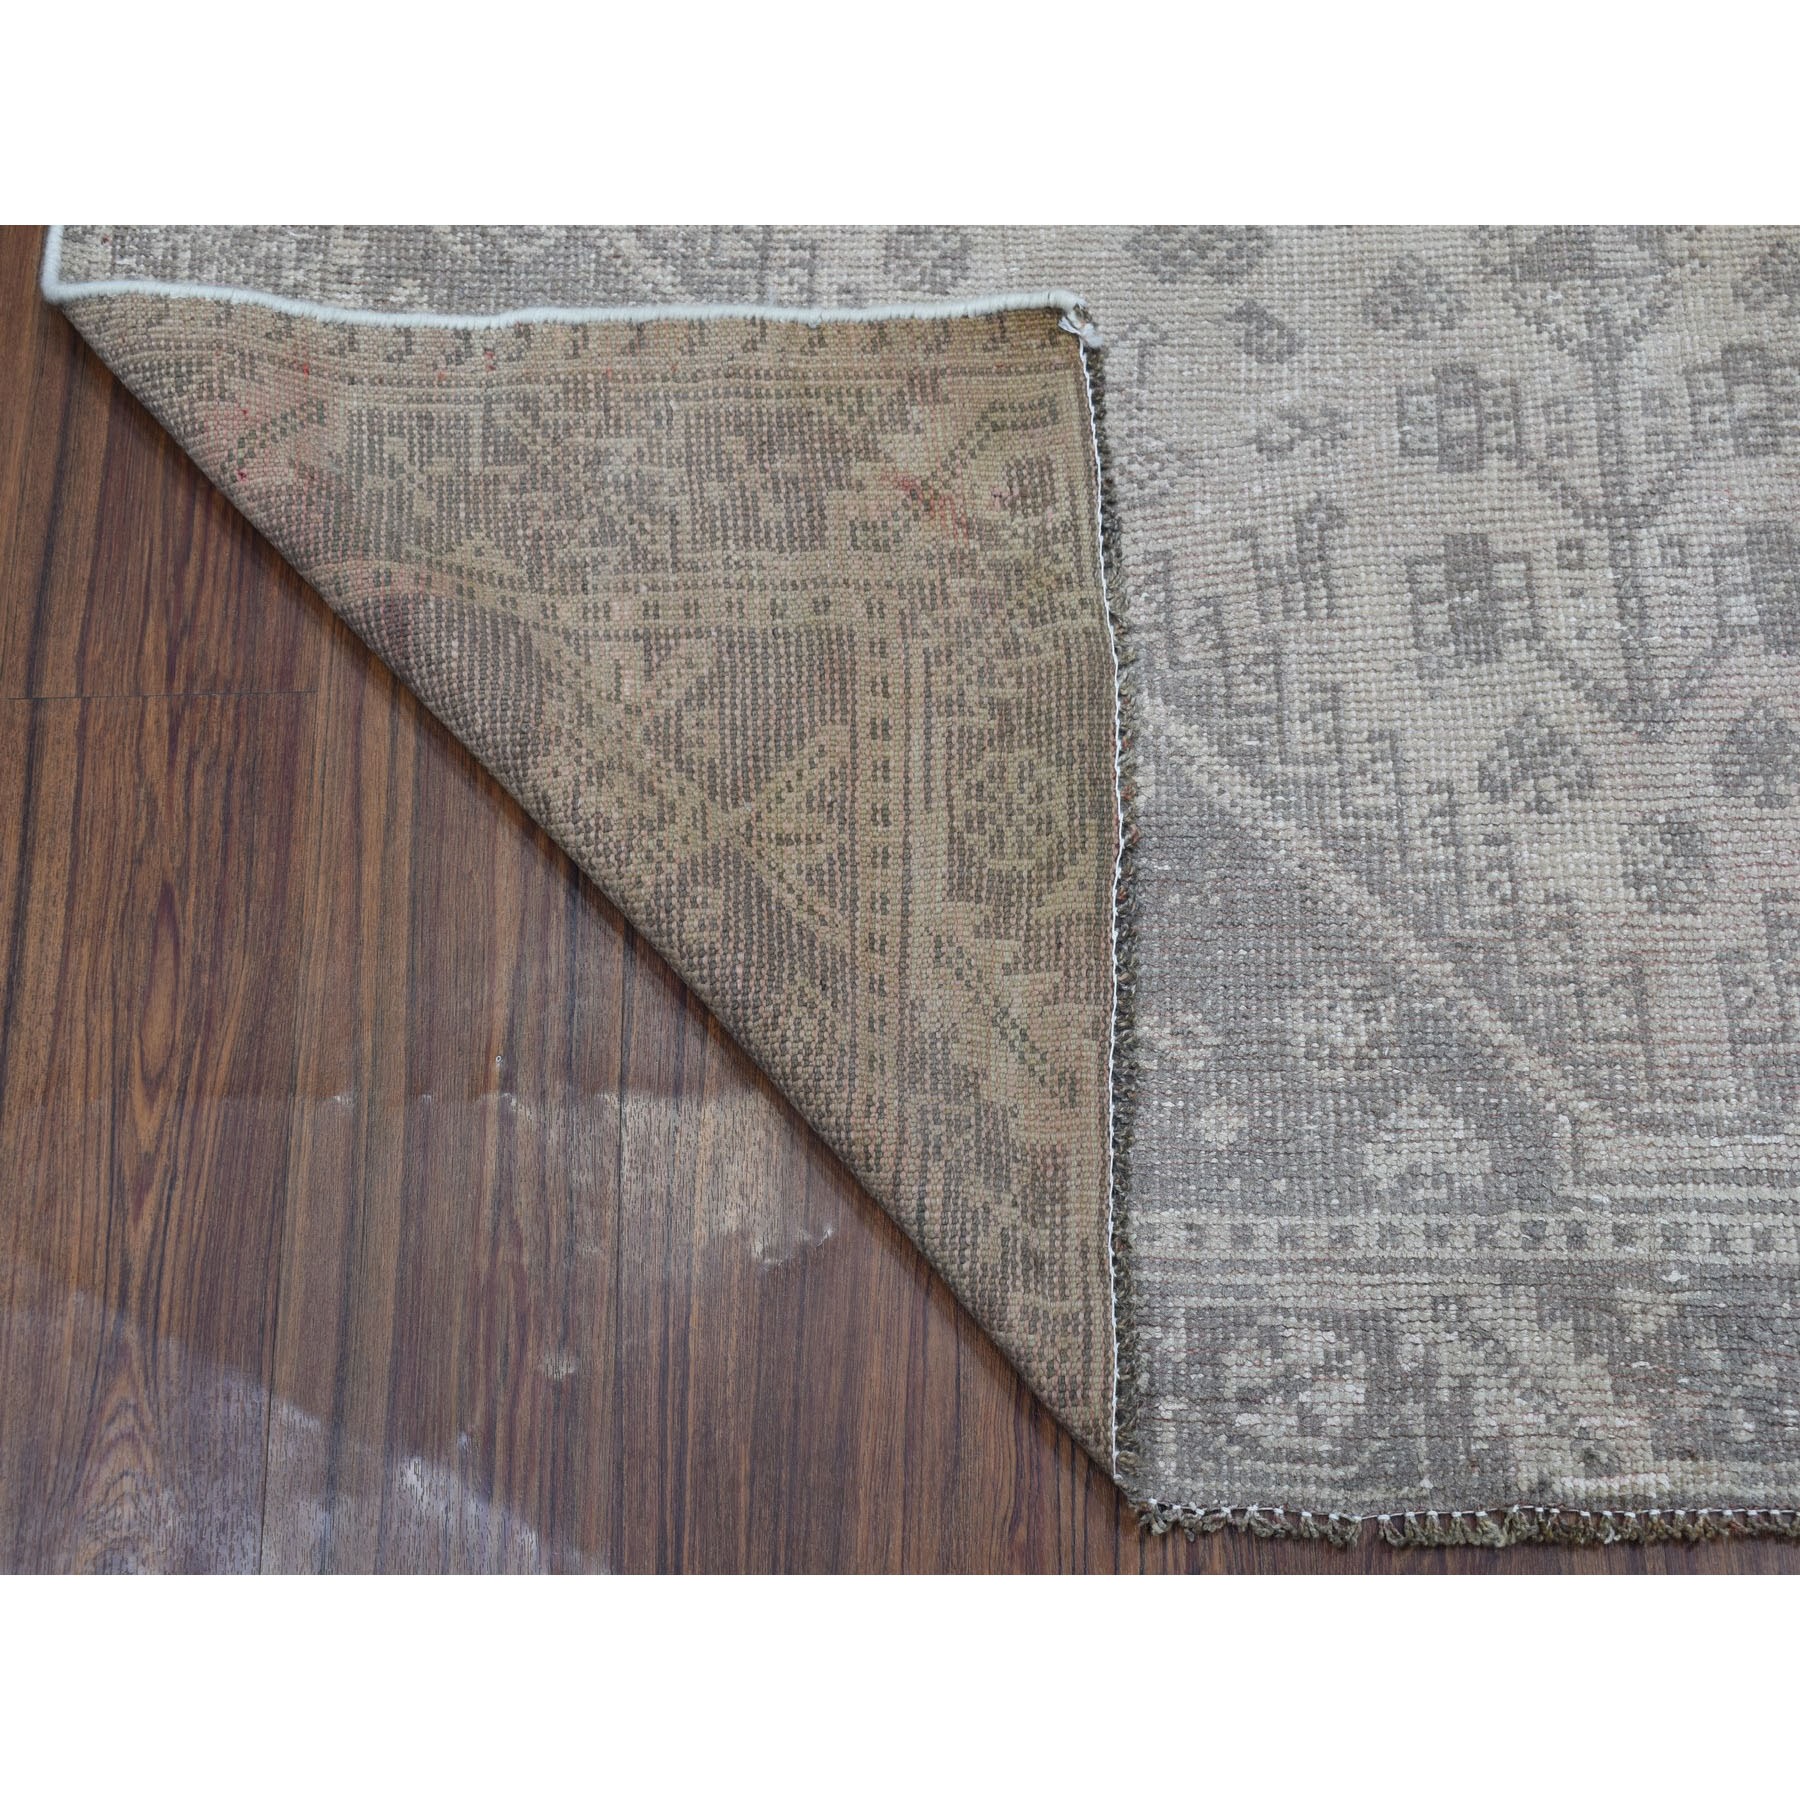 5-1 x7-4  Vintage And Worn Down Distressed Colors Persian Qashqai Hand Knotted Bohemian Rug 